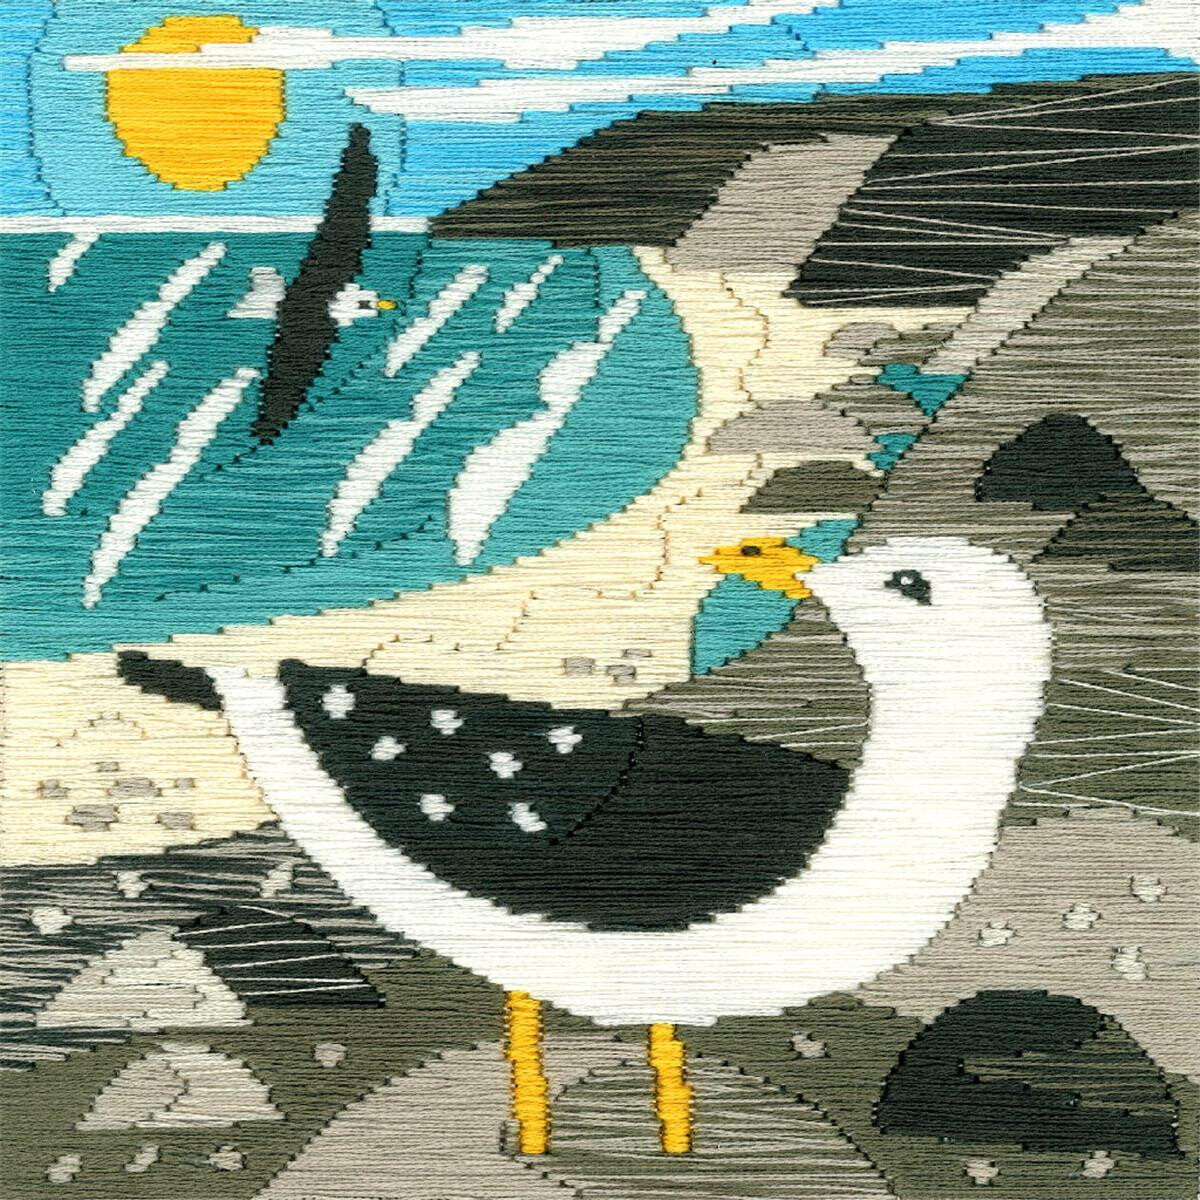 An embroidery pack from Bothy Threads shows a seagull...